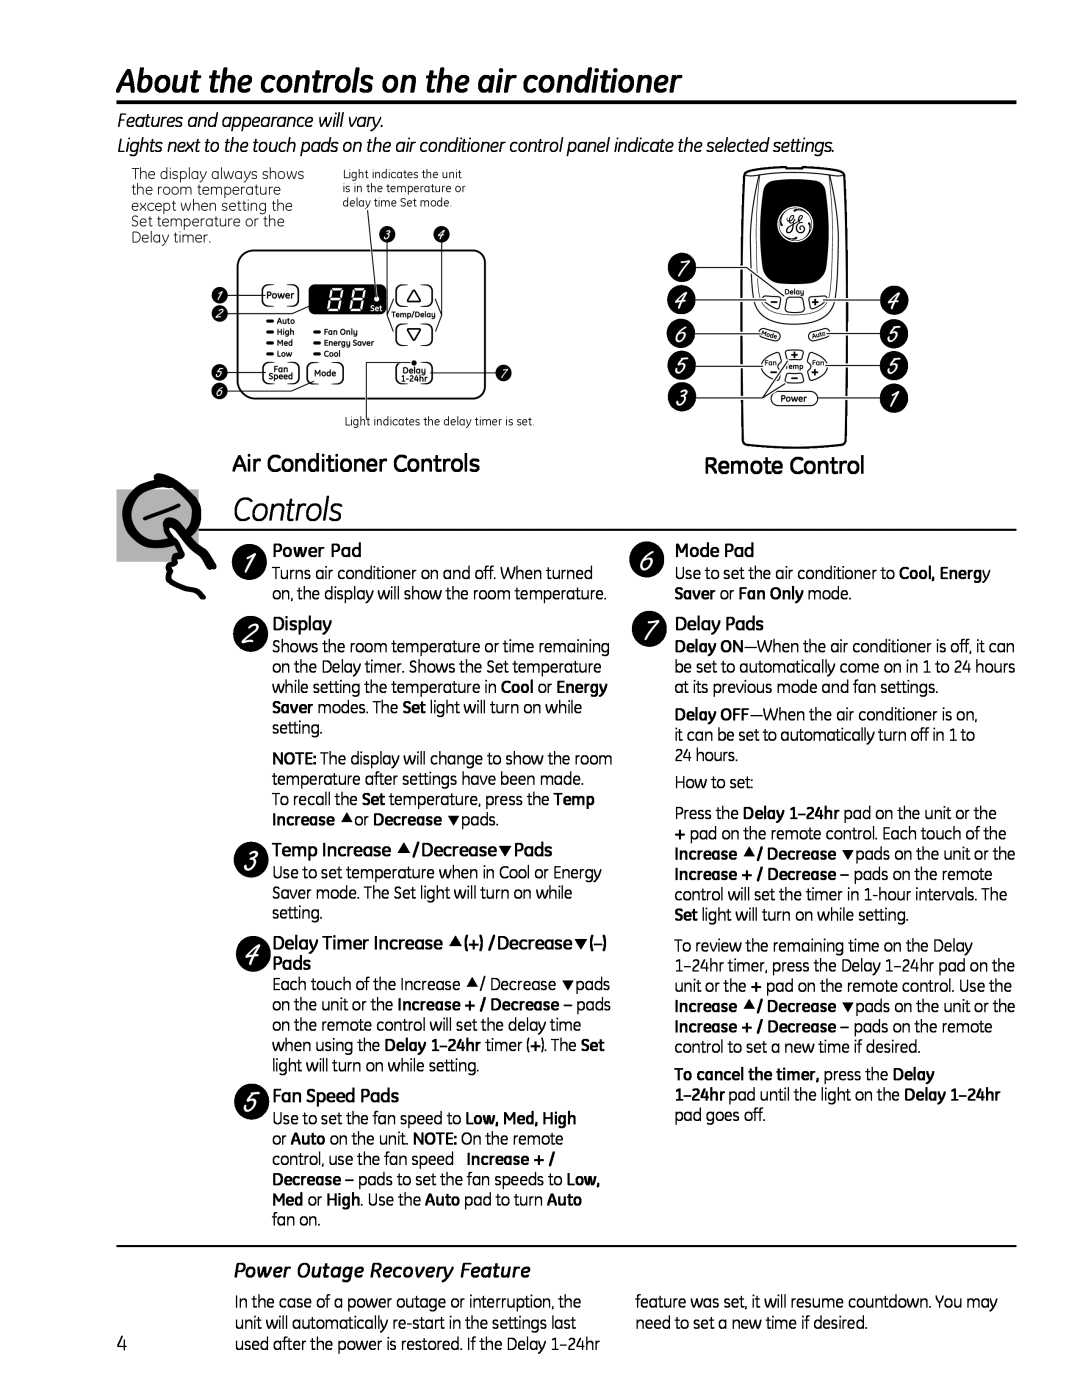 GE 880 installation instructions About the controls on the air conditioner, Air Conditioner Controls, Remote Control 